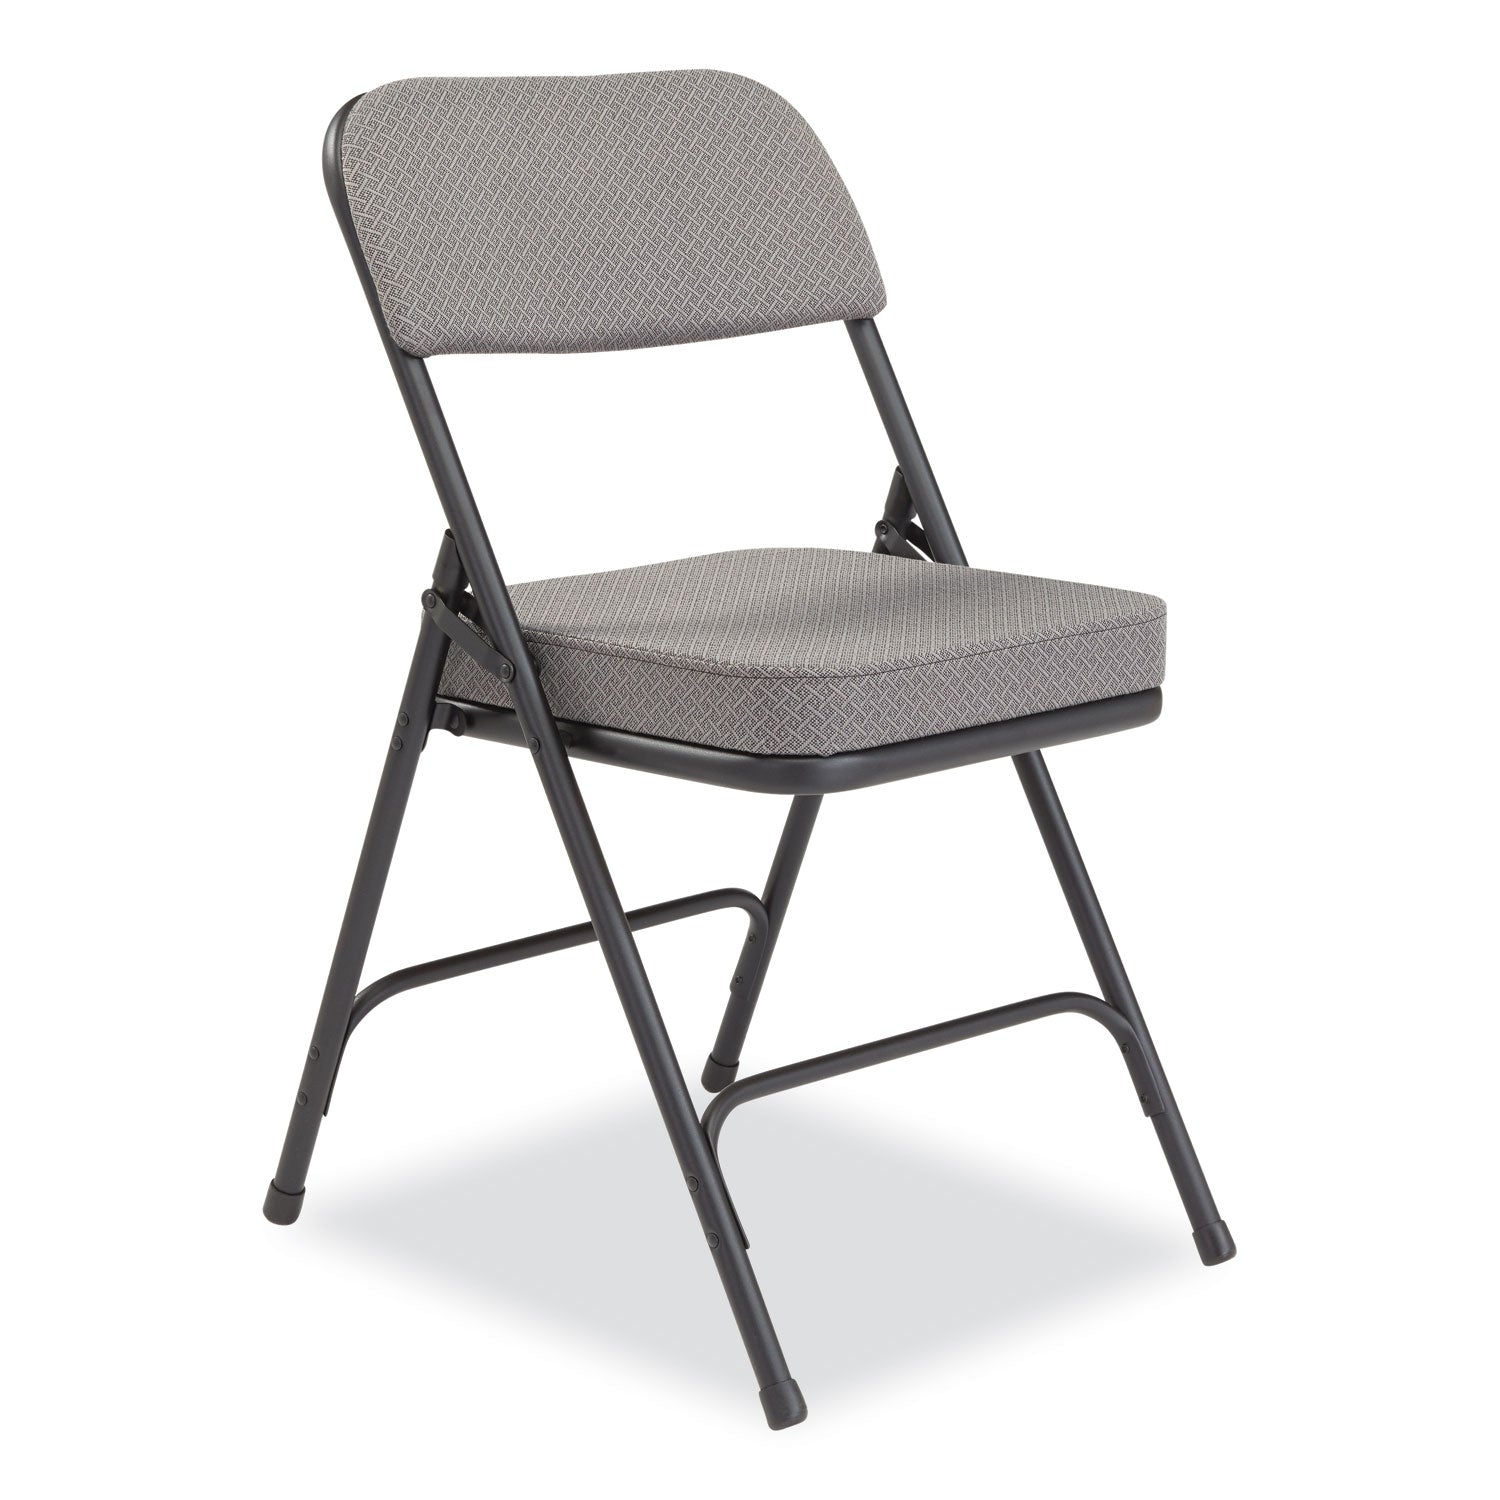 3200-series-fabric-dual-hinge-folding-chair-supports-300-lb-charcoal-seat-back-black-base-2-ct-ships-in-1-3-bus-days_nps3212 - 2